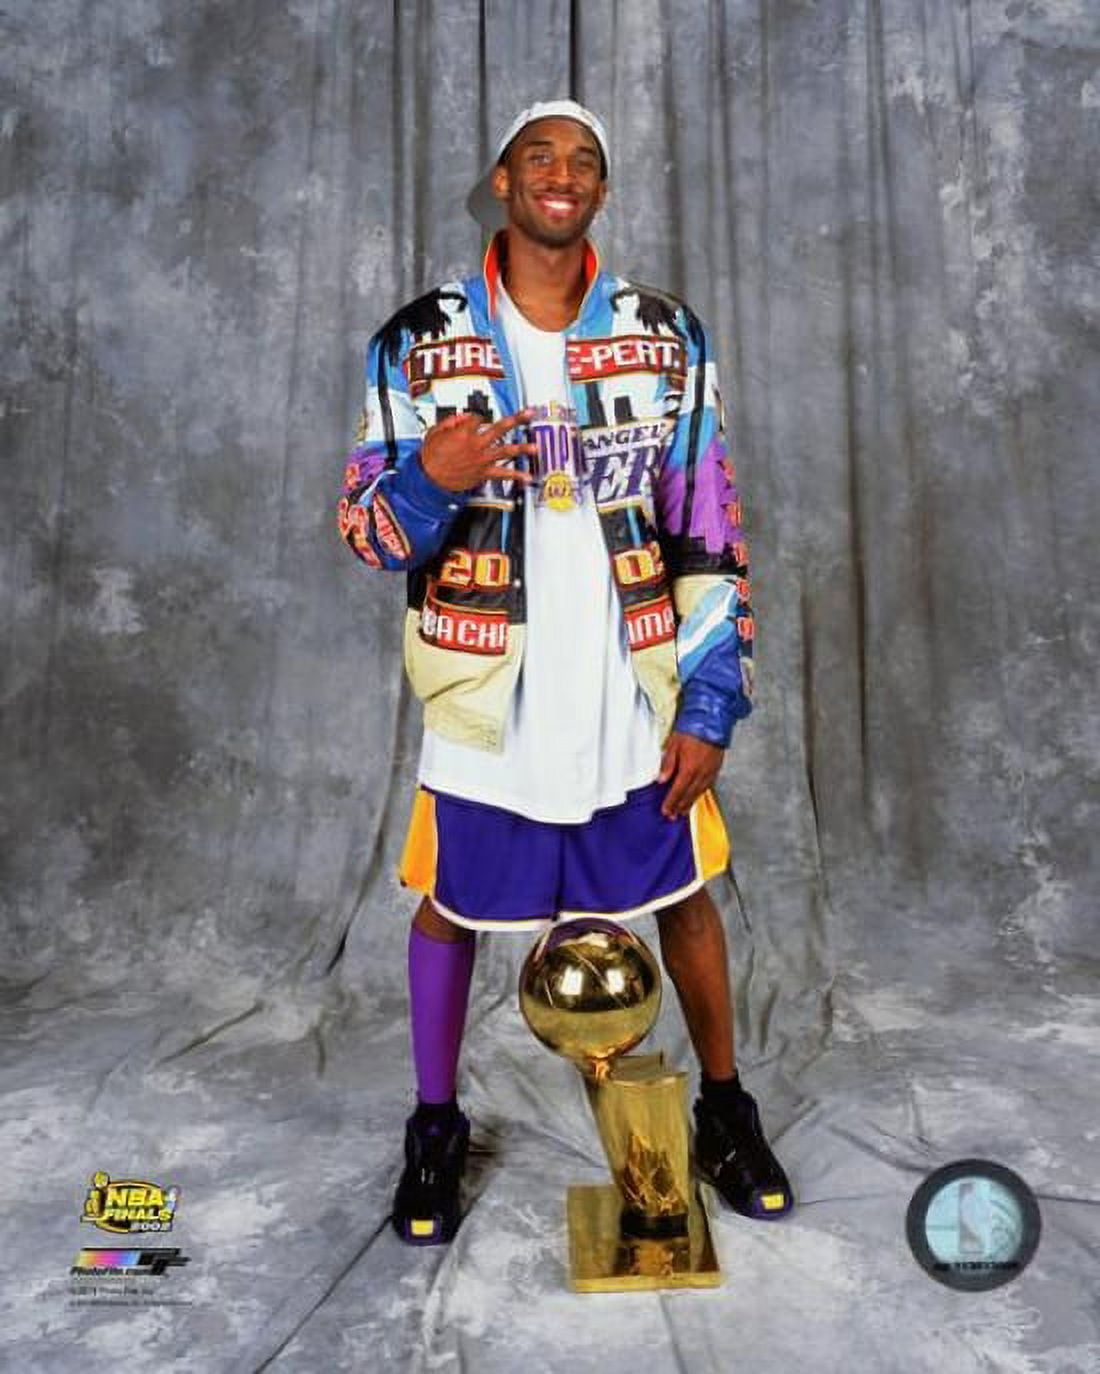 Kobe Bryant with the NBA Championship Trophy after winning Game 4 of the  2002 NBA Finals Photo Print (20 x 24)